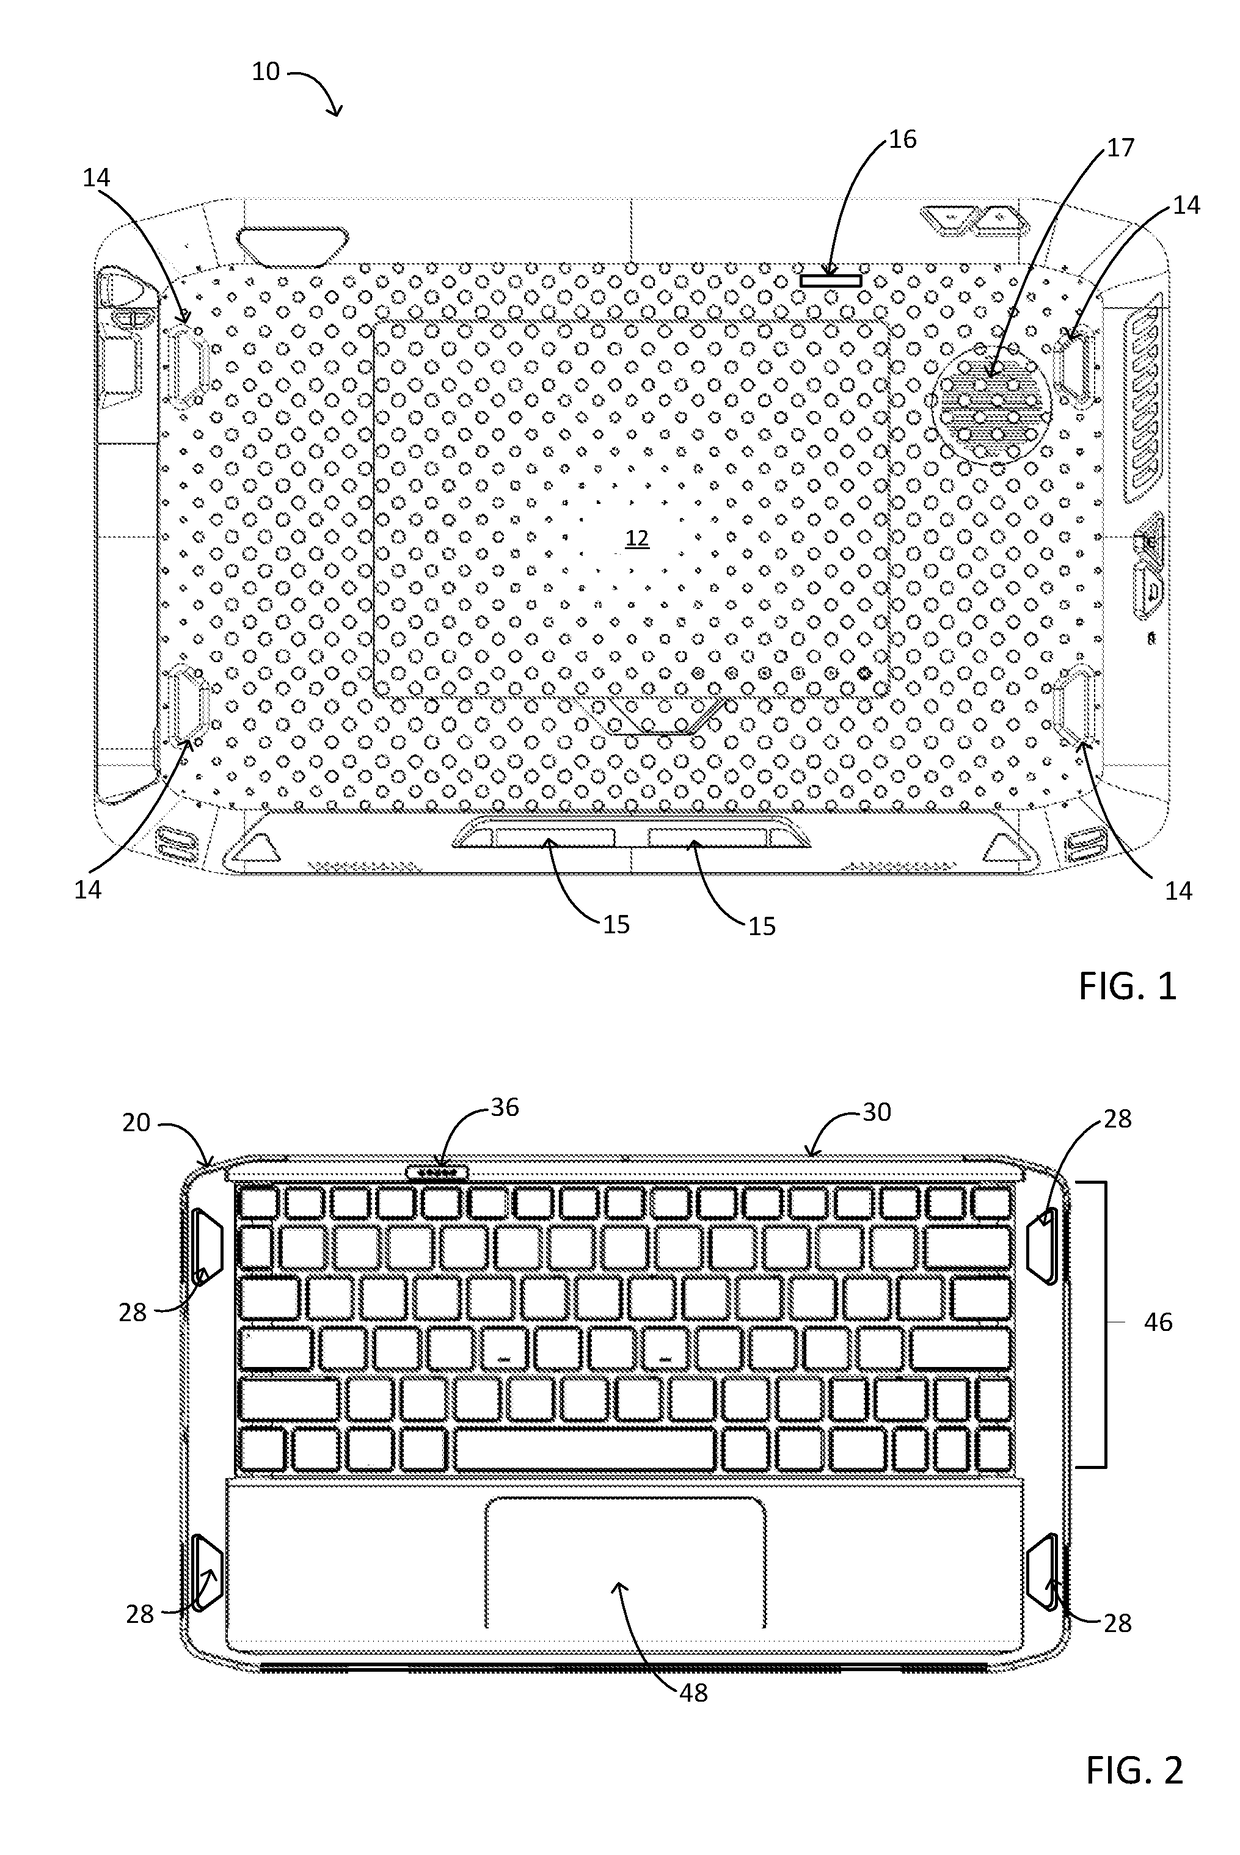 Wireless Keyboard Module, Portable Electronic Device And Methods For Charging And Pairing A Wireless Keyboard Module To A Portable Electronic Device